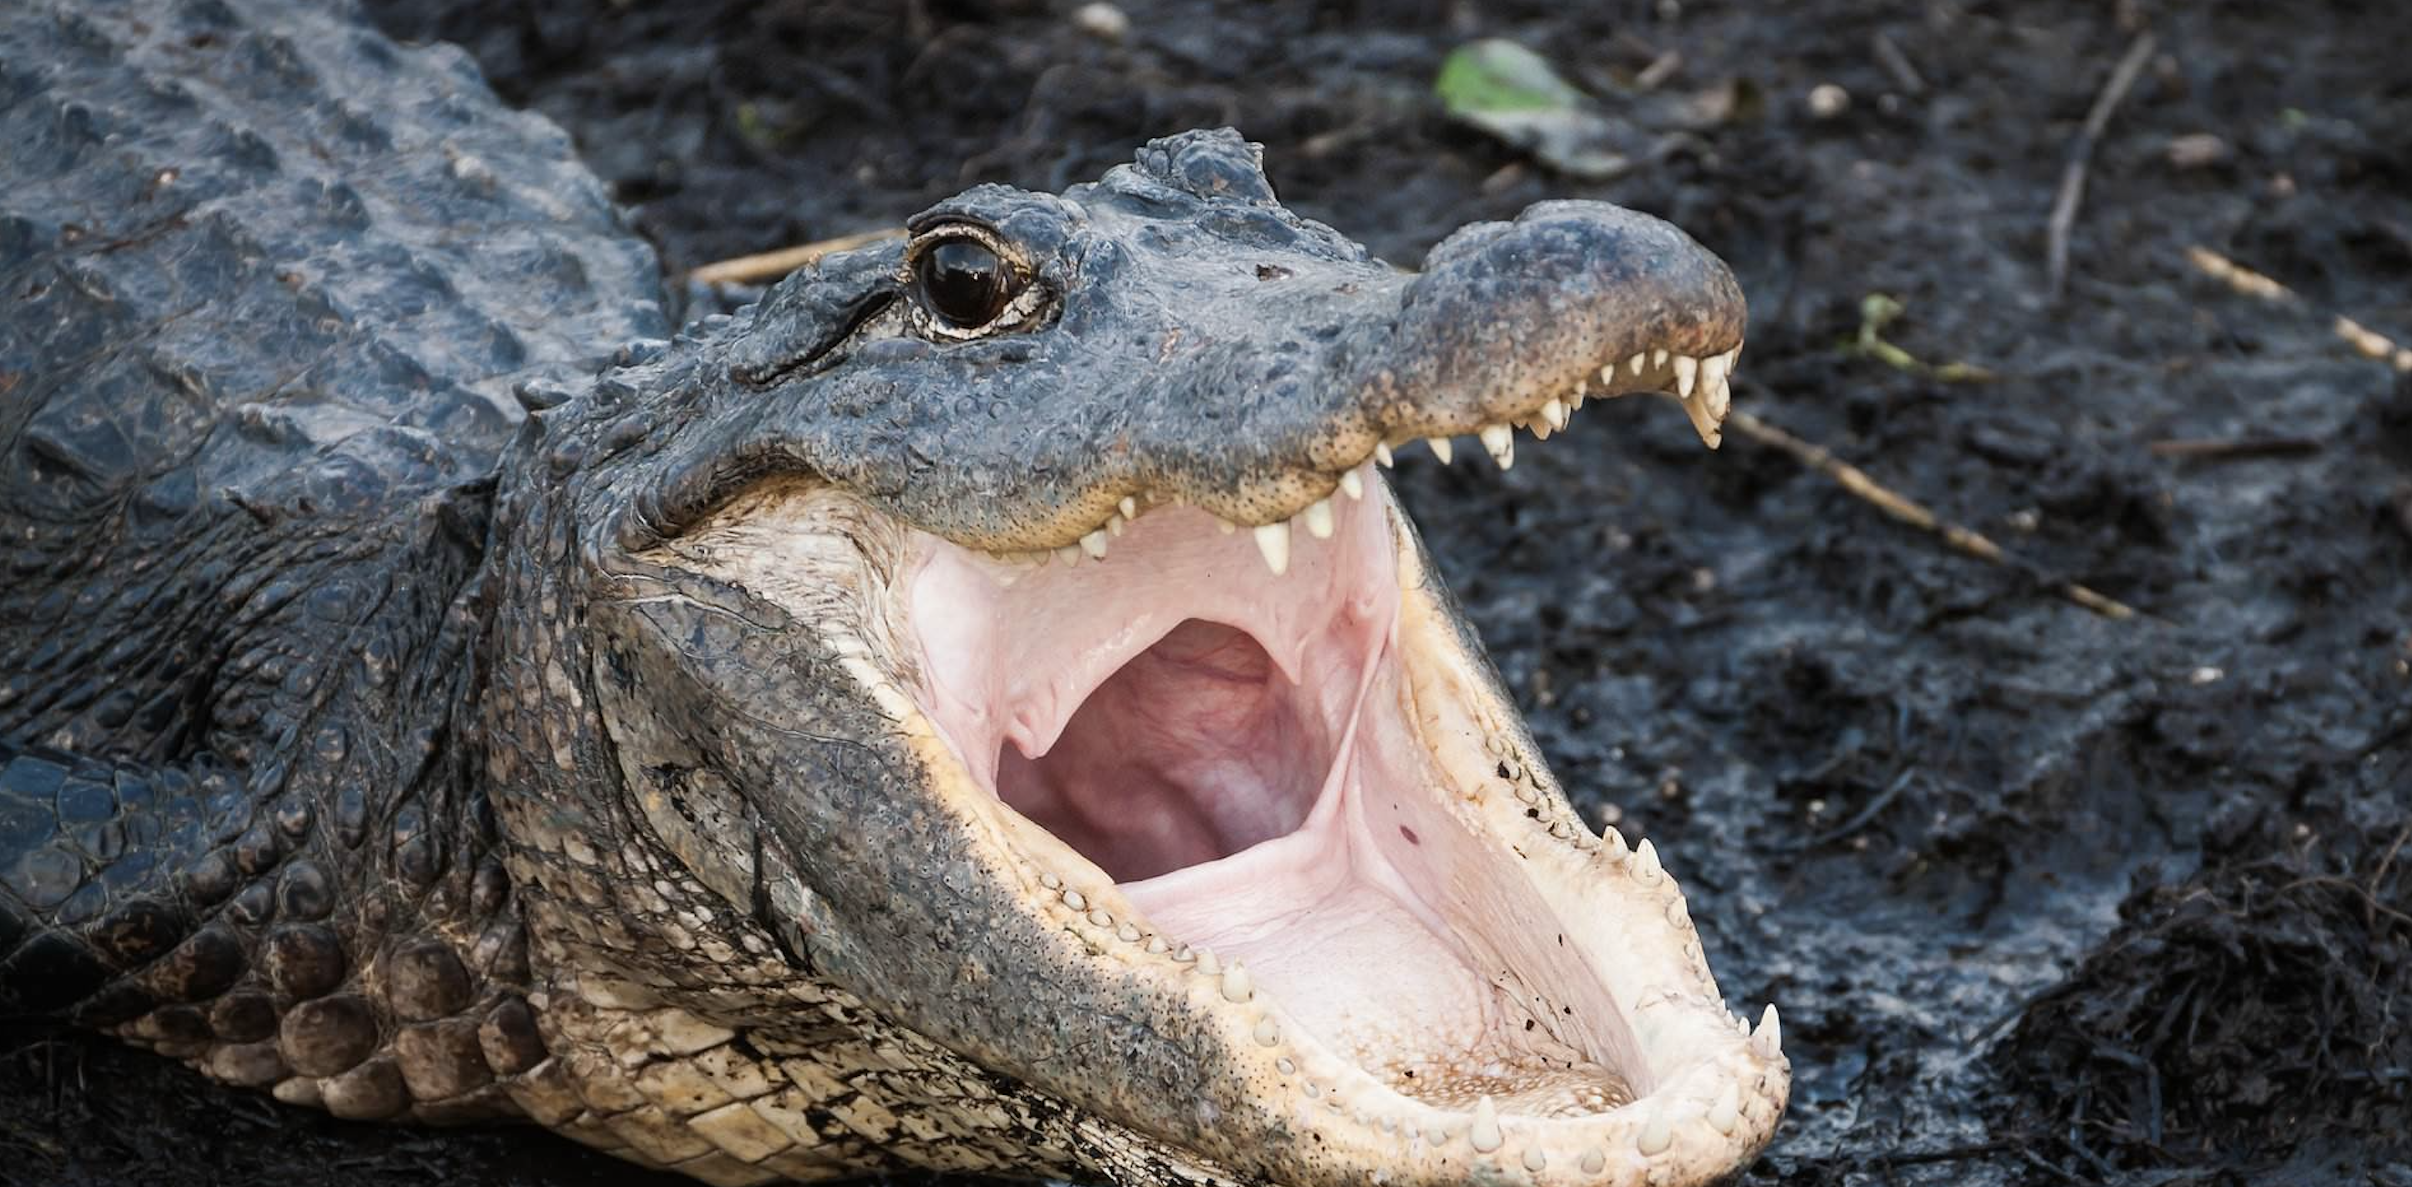 True or False: Tennessee police warn flushing drugs could create “Meth-gators”